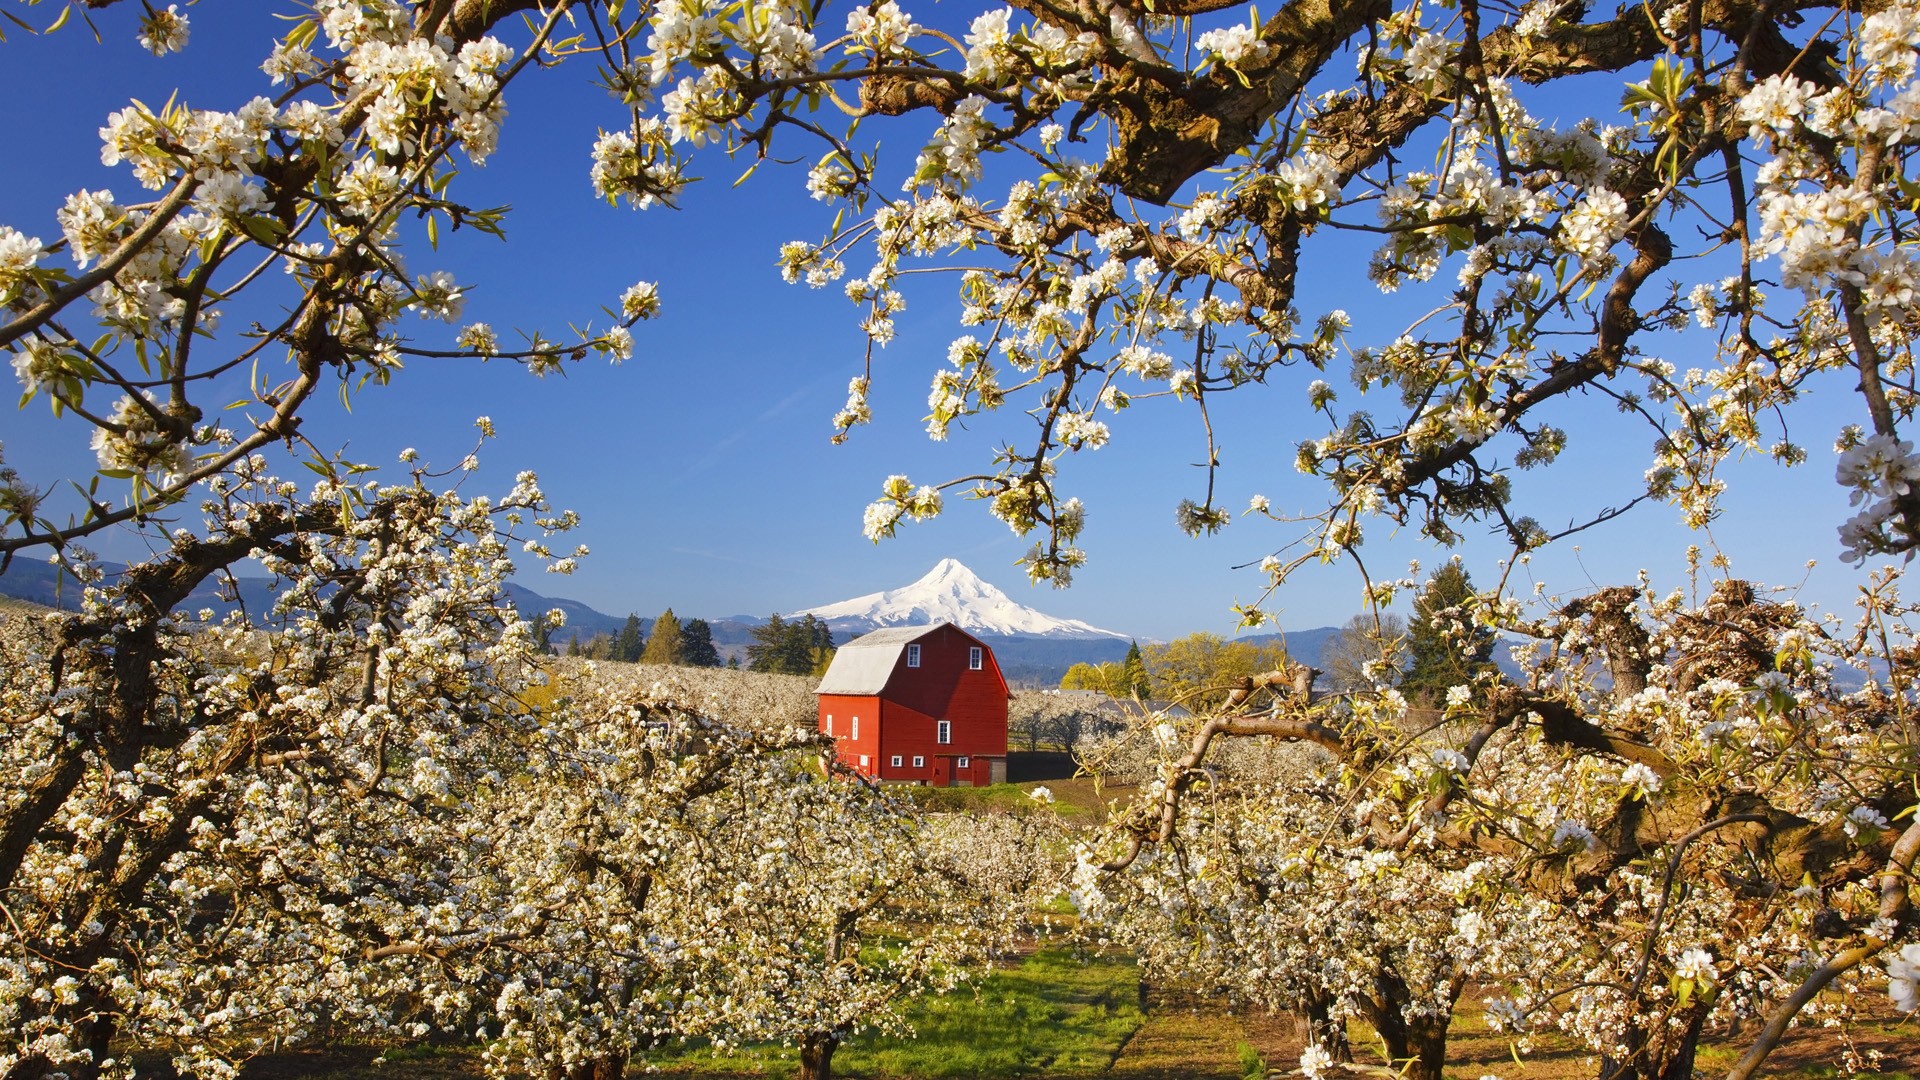 Nature Barn Blossoms Spring Orchards Landscape Snowy Mountain 1920x1080